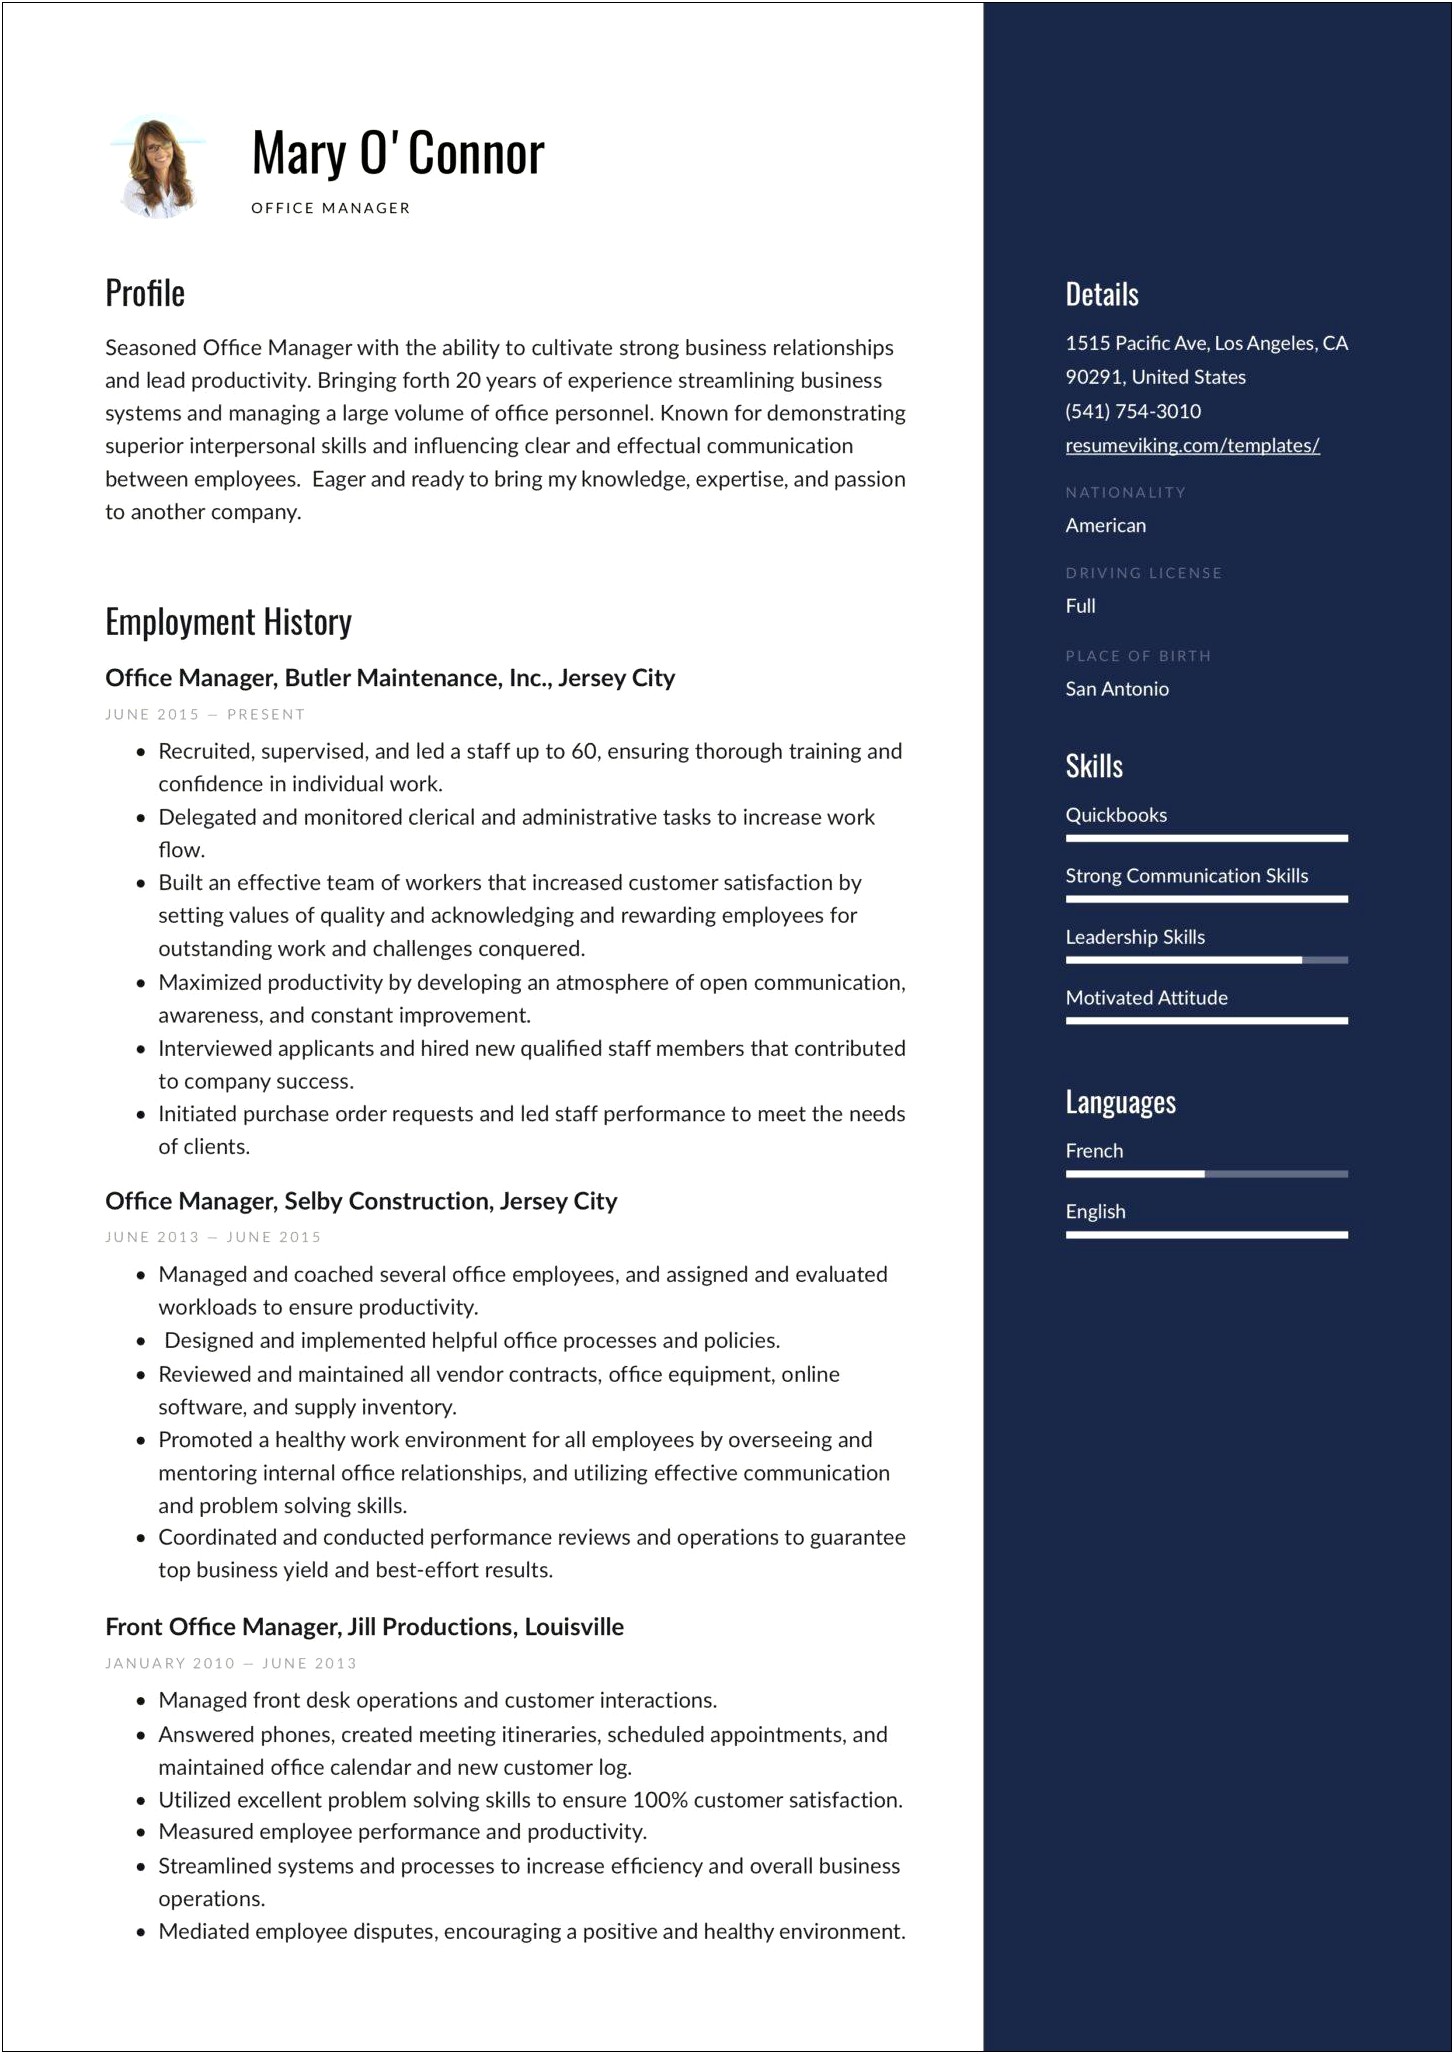 Resume For Office Manager Responsibility